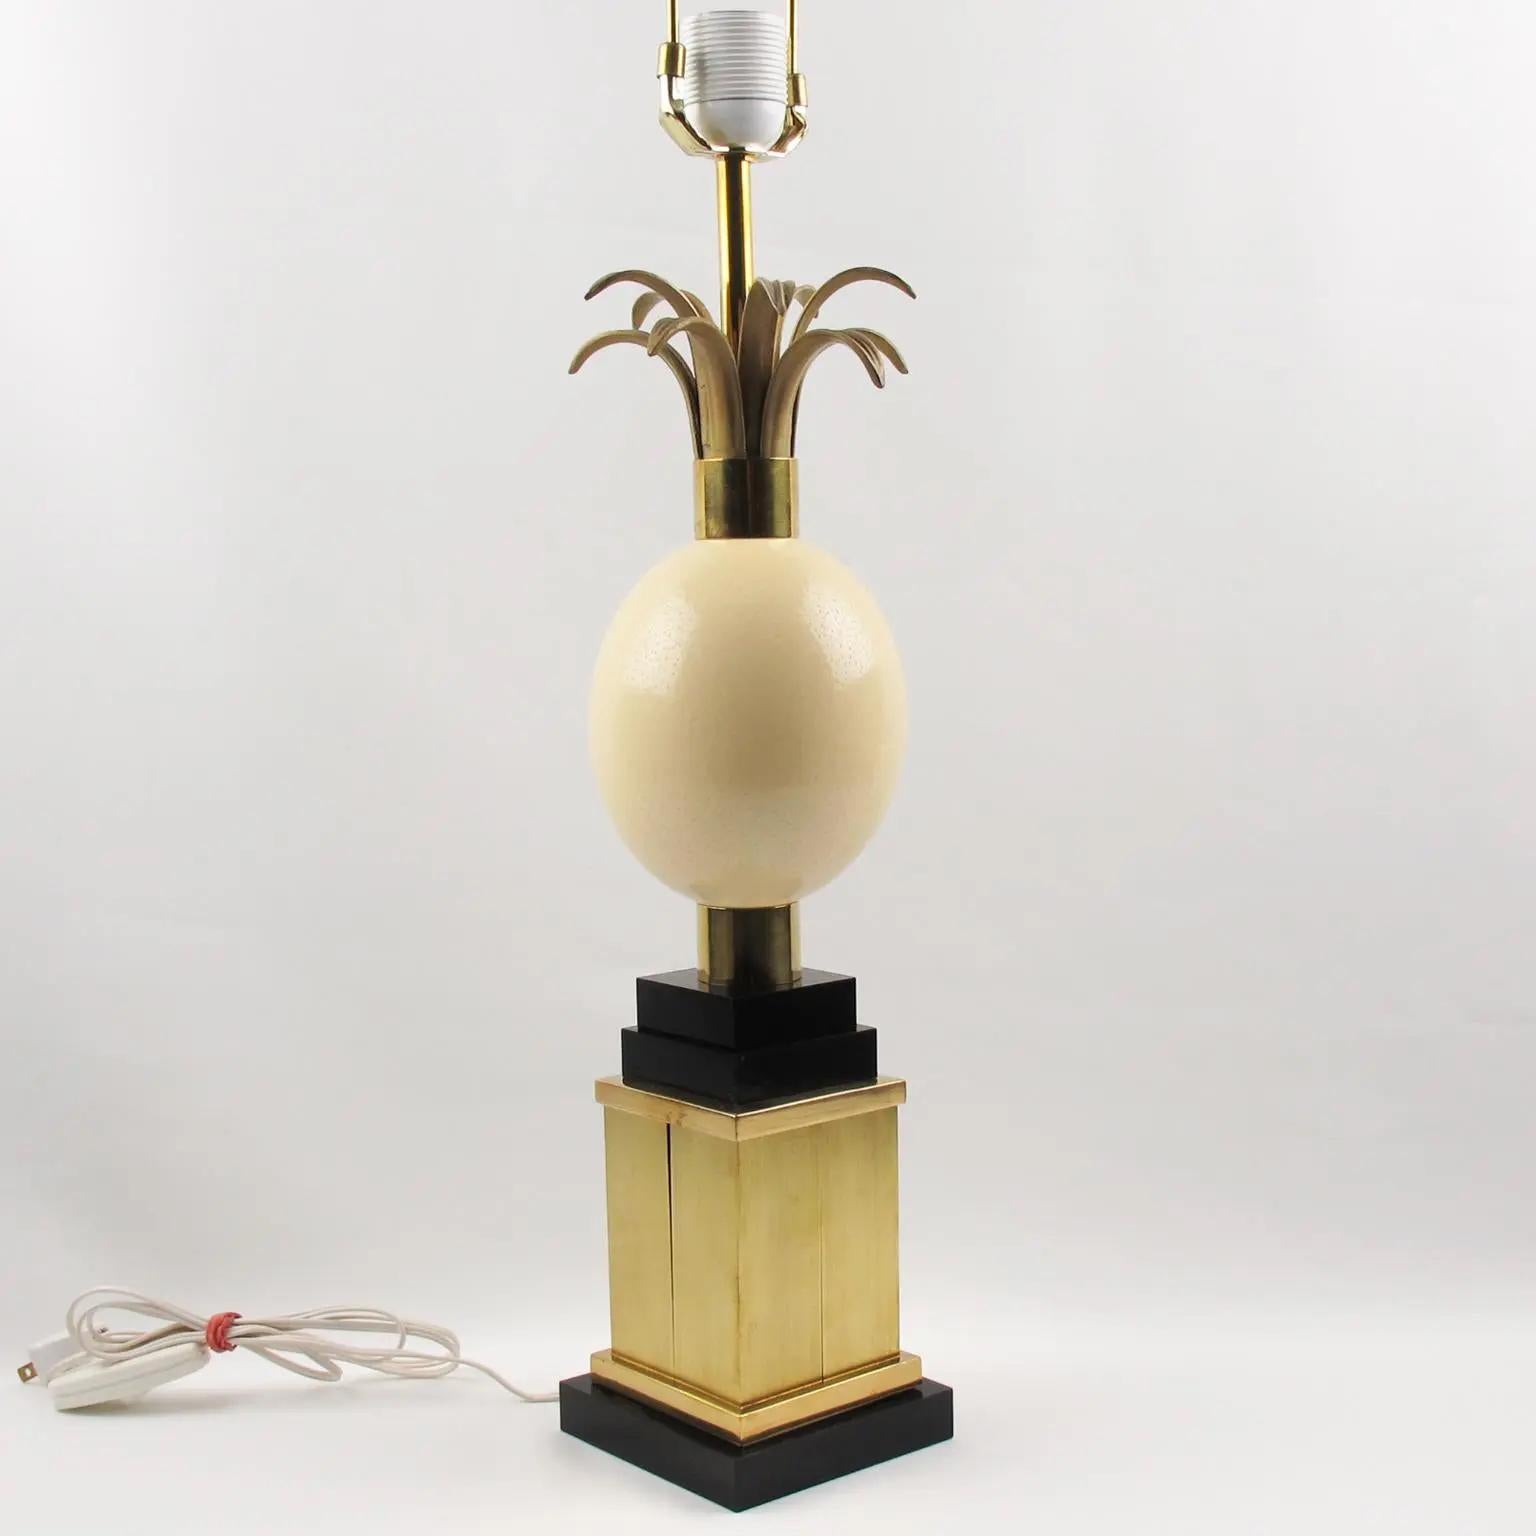 Maison Charles et Fils, France, designed and manufactured this lovely tall table lamp in the 1970s. The piece features a massive ostrich egg topped with gilded metal fronds on gilded brass and a black Lucite pedestal base. The lamp is rewired to fit